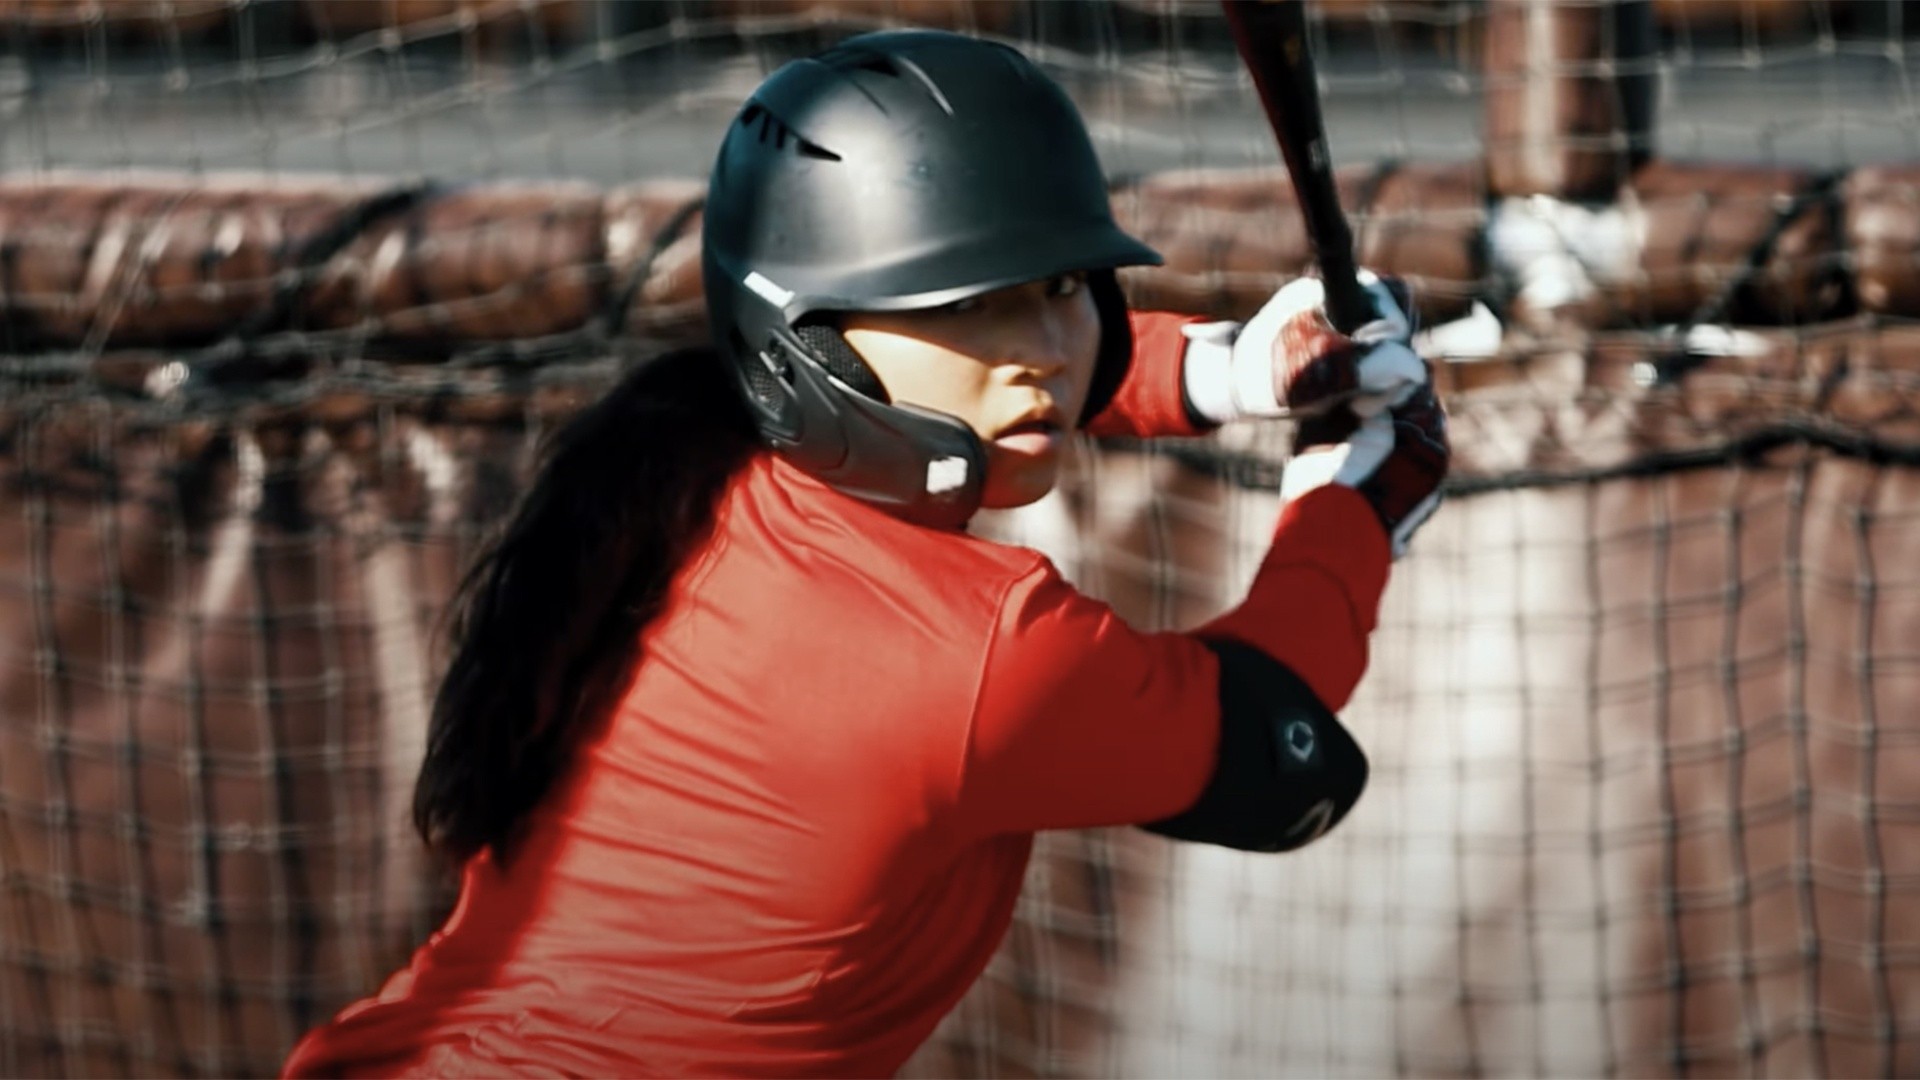 Olivia Pichardo becomes first woman to play in Division I baseball